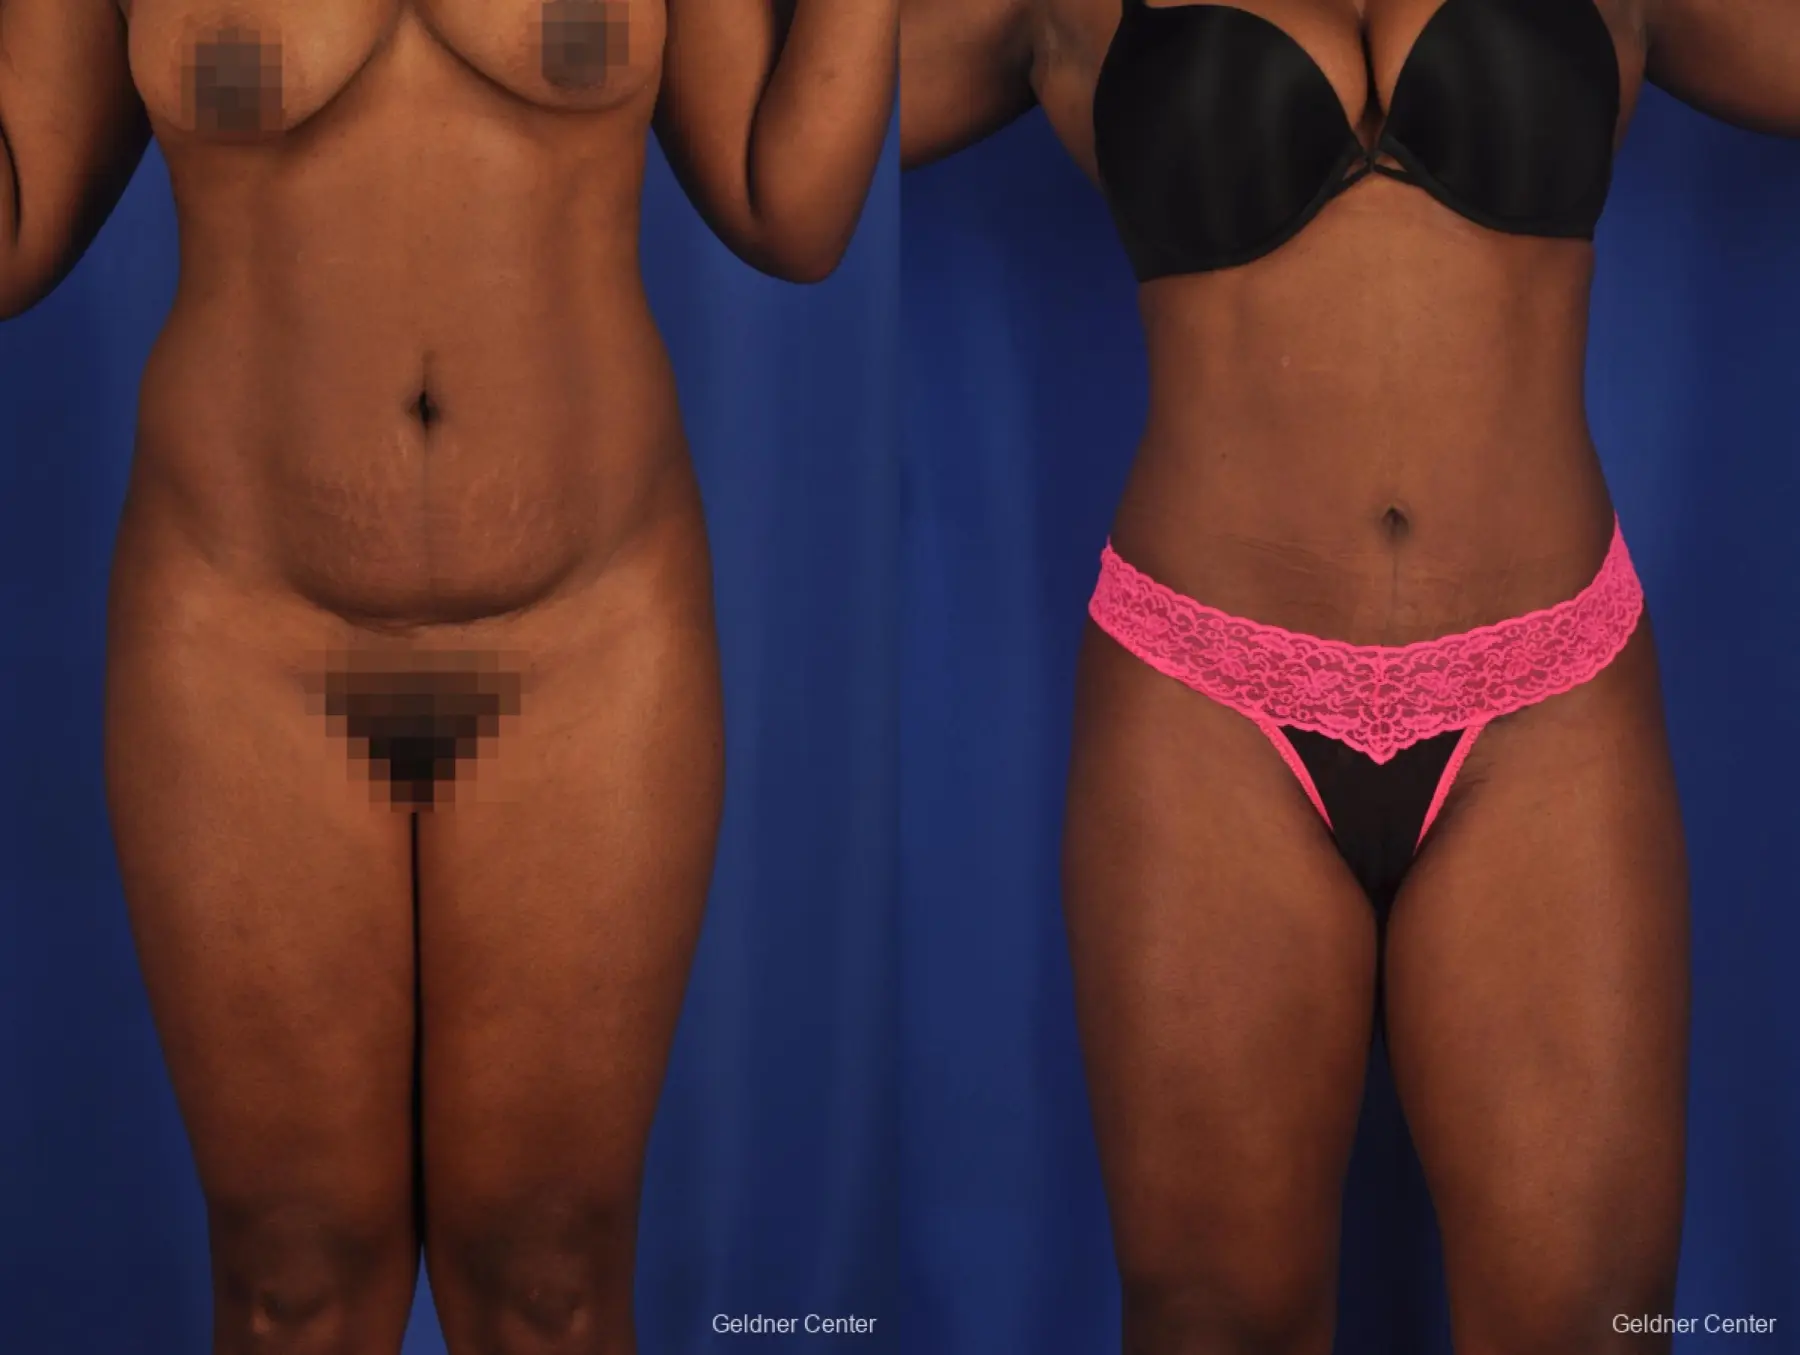 Liposuction: Patient 3 - Before and After 1